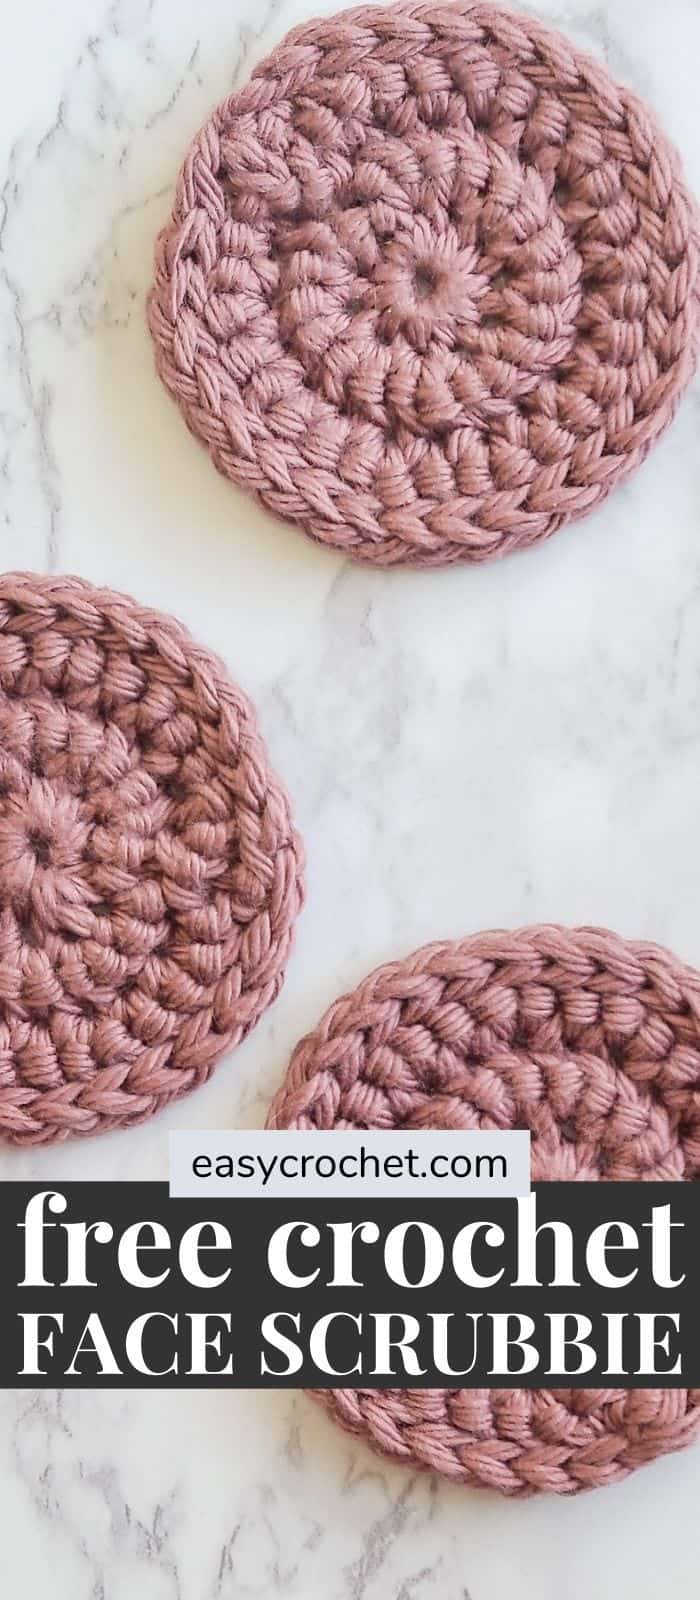 Easy to Crochet Makeup Remover Reusable Pads. Crochet this washable, dryable and great for the environment crochet pattern today! Find it at easycrochet.com via @easycrochetcom